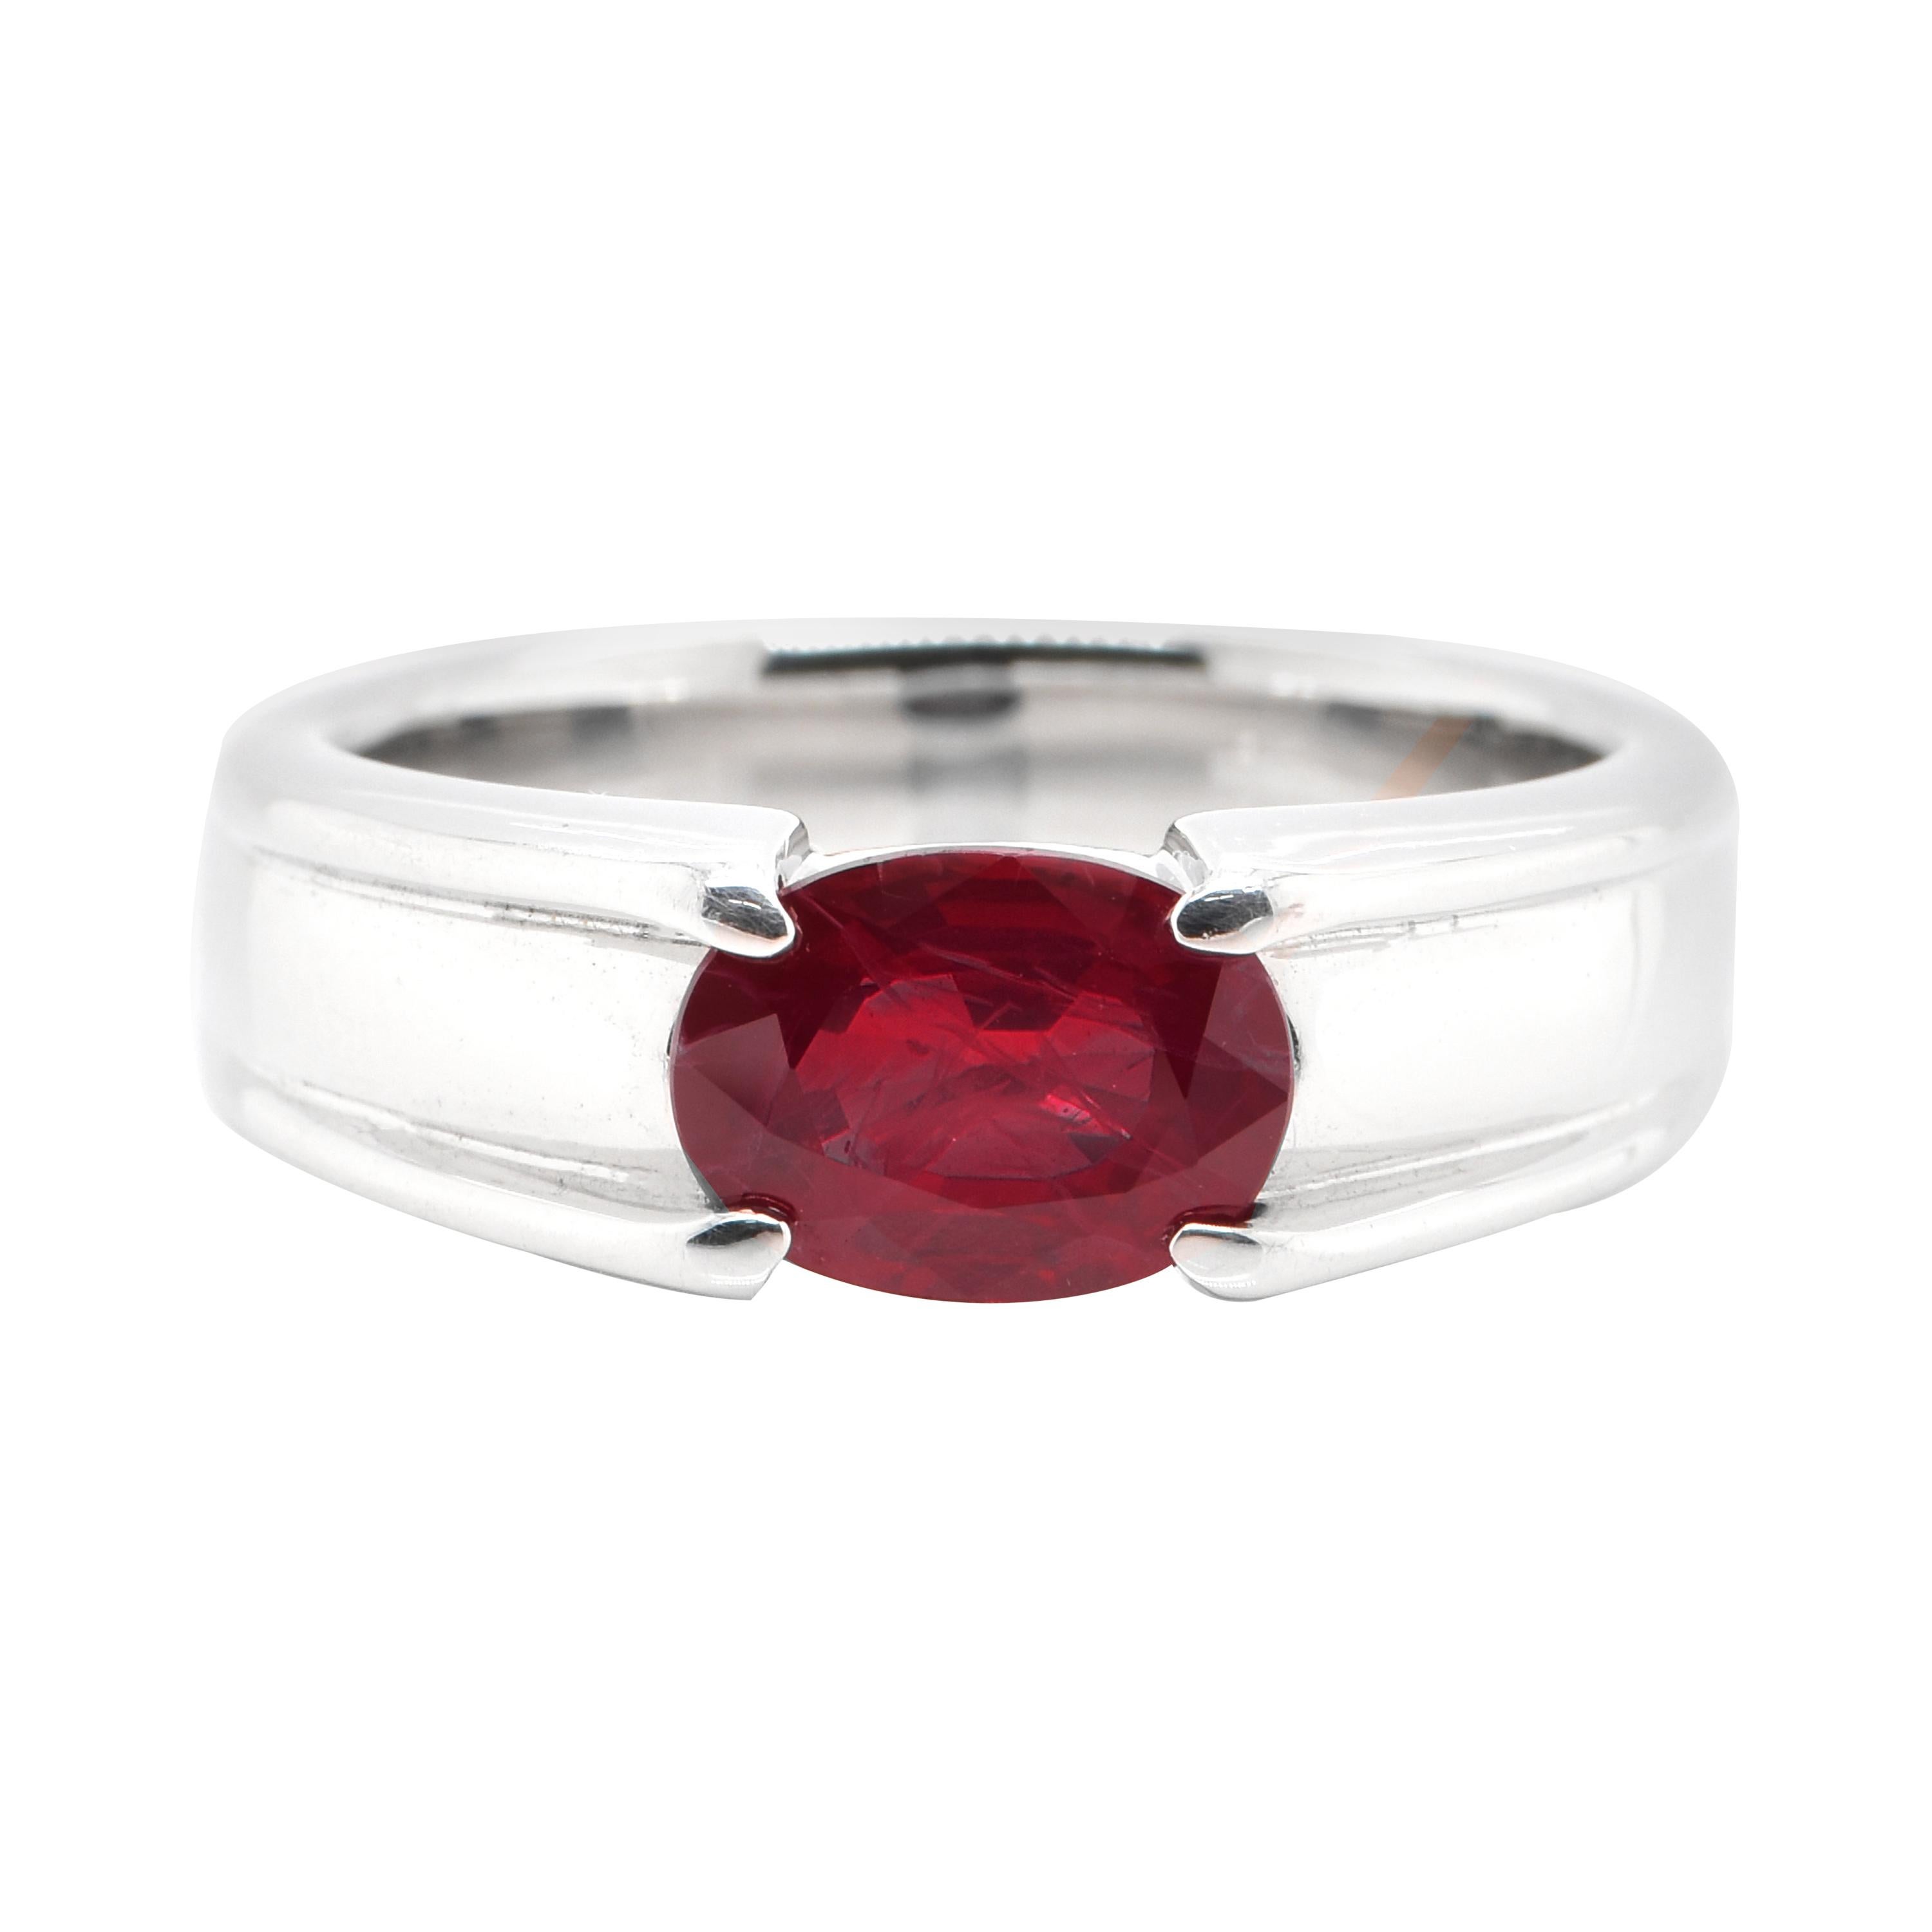 GRS Certified 2.01 Carat Natural Pigeon's Blood Color Ruby Ring Set in Platinum